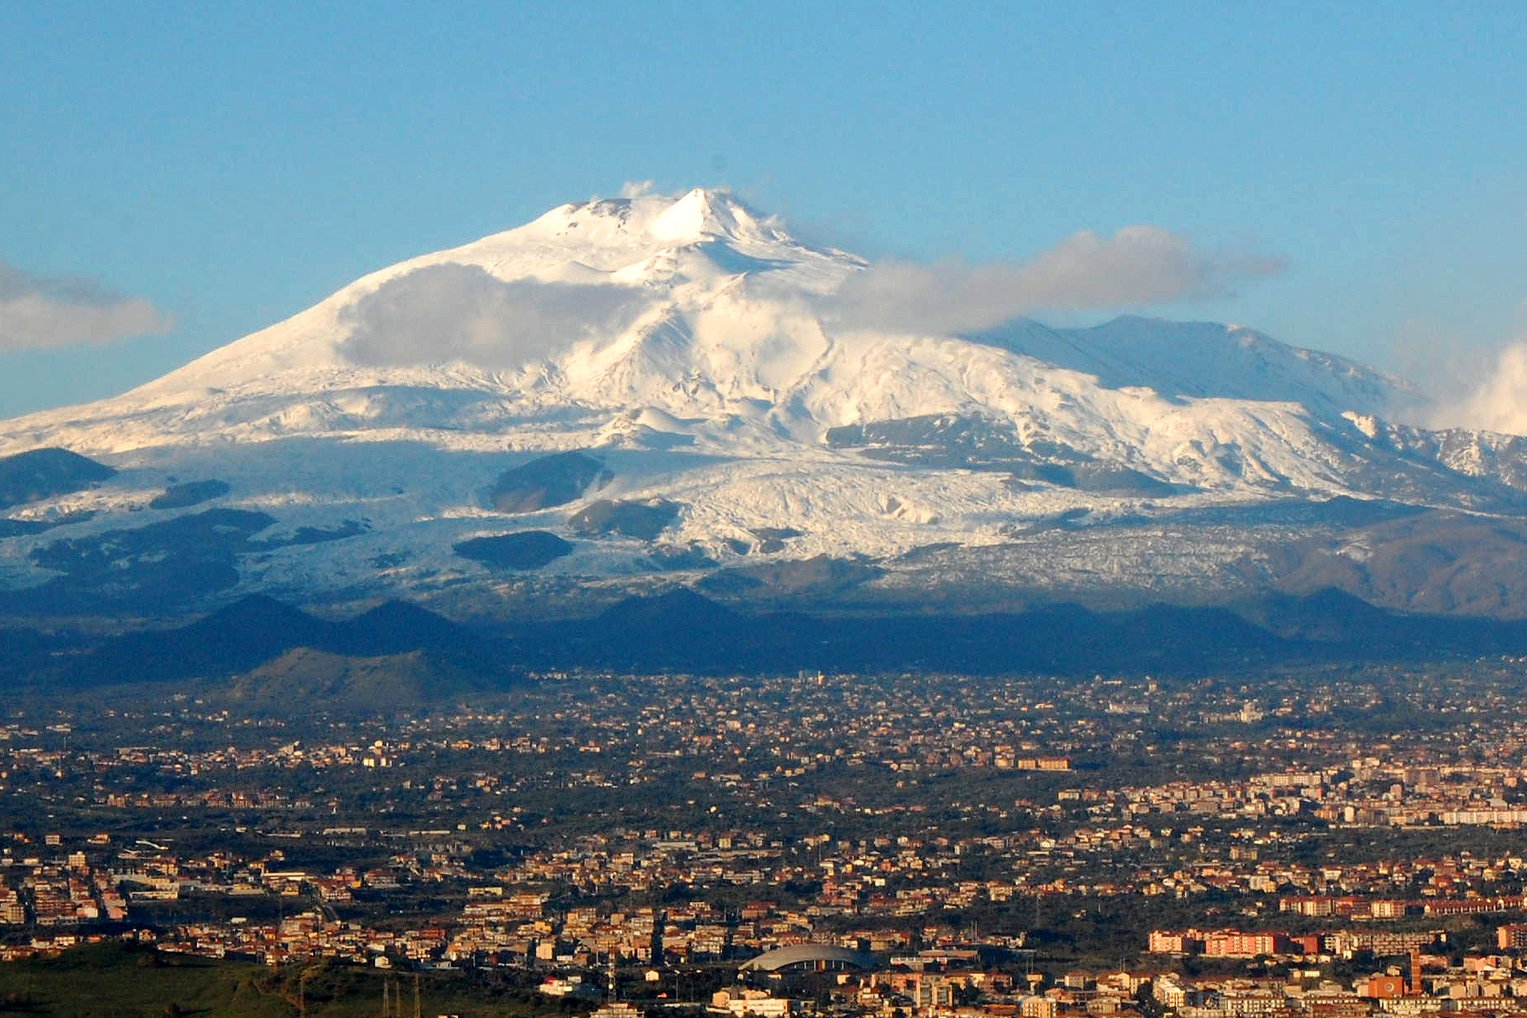 Mt. Etna looming over Catania